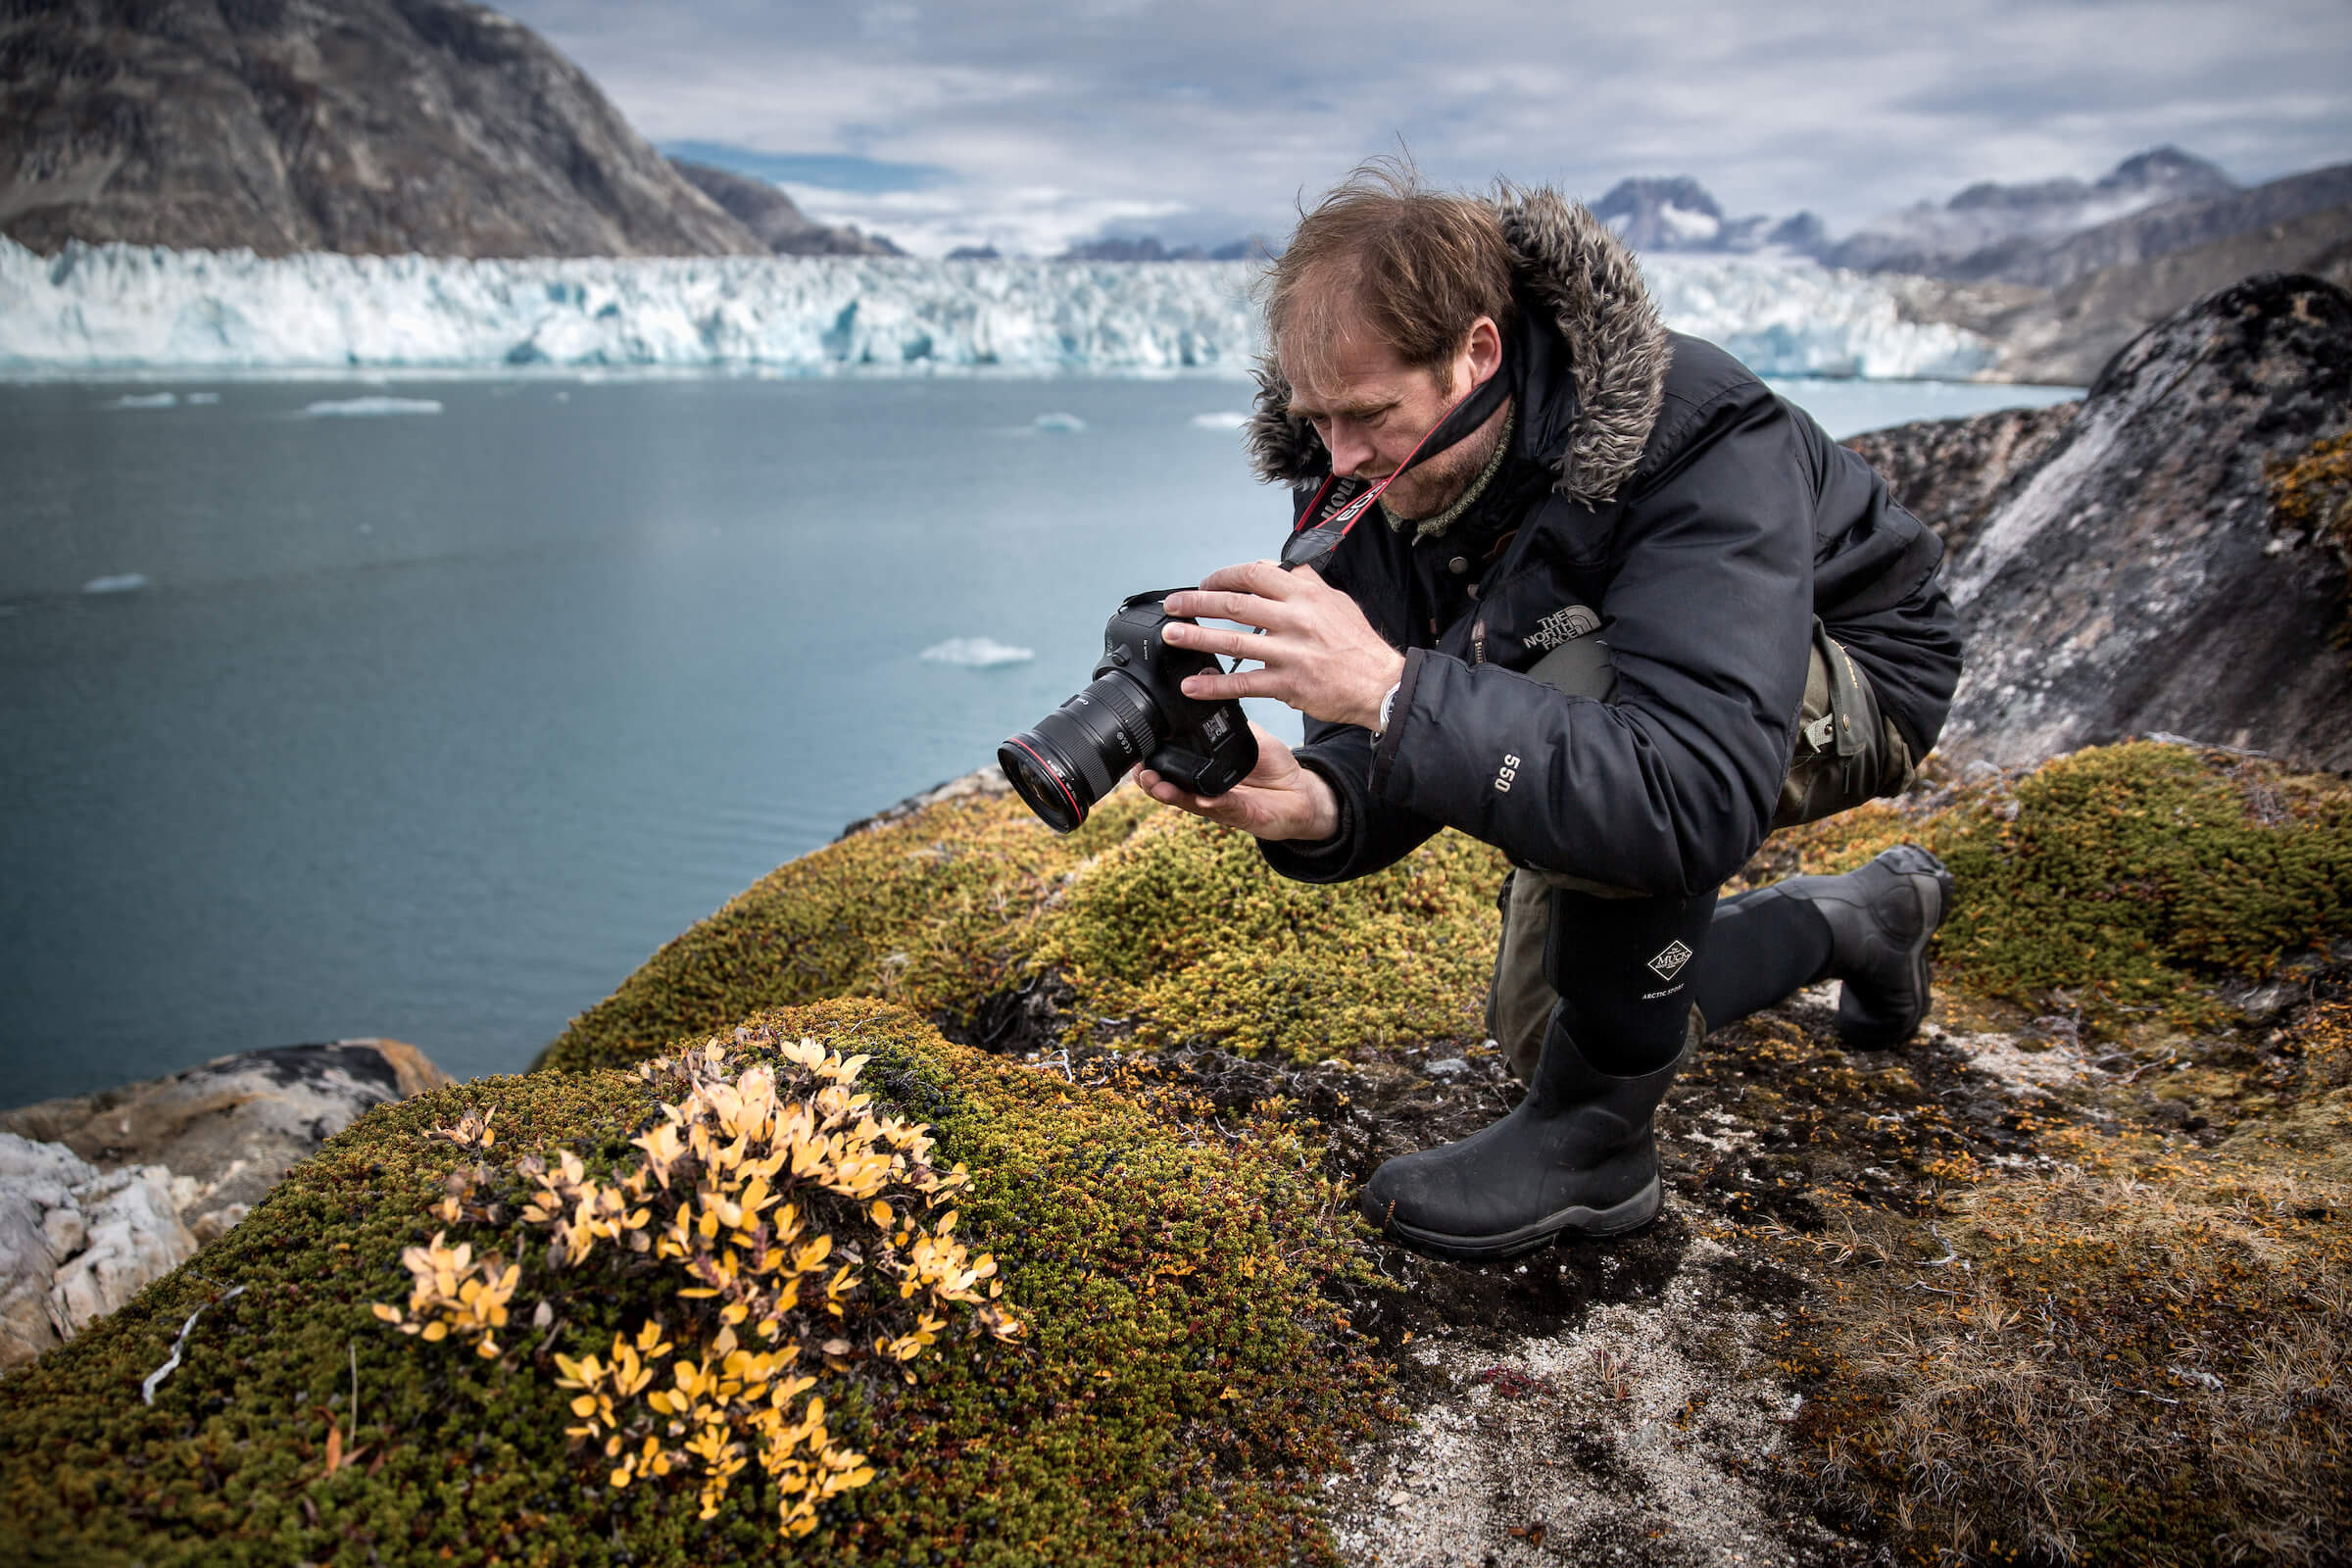 A photographer shooting flowers and plants by the Knud Rasmussen Glacier in East Greenland. By Mads Pihl